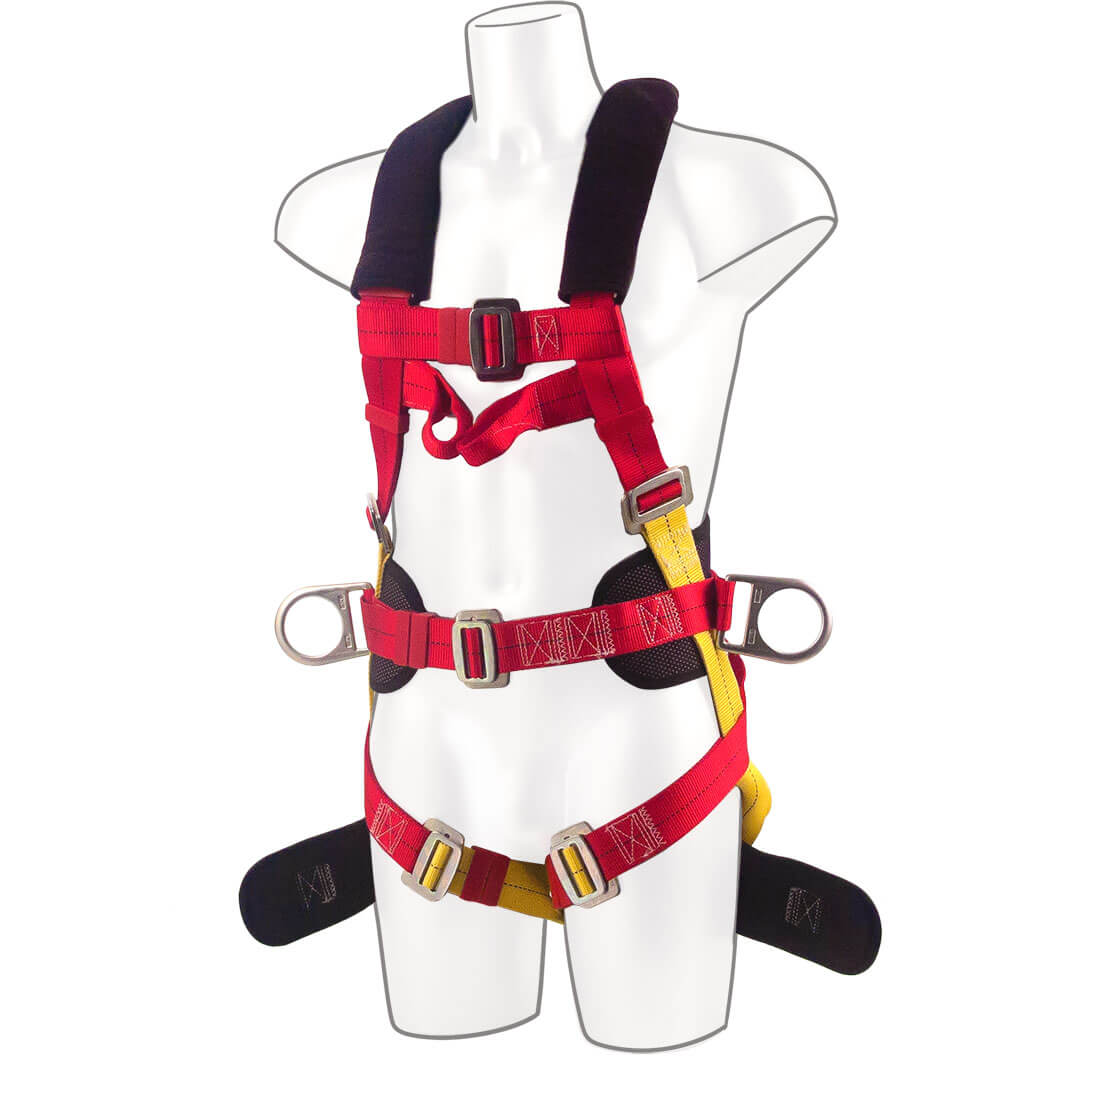 Portwest 3 Point Comfort Plus Harness - Red